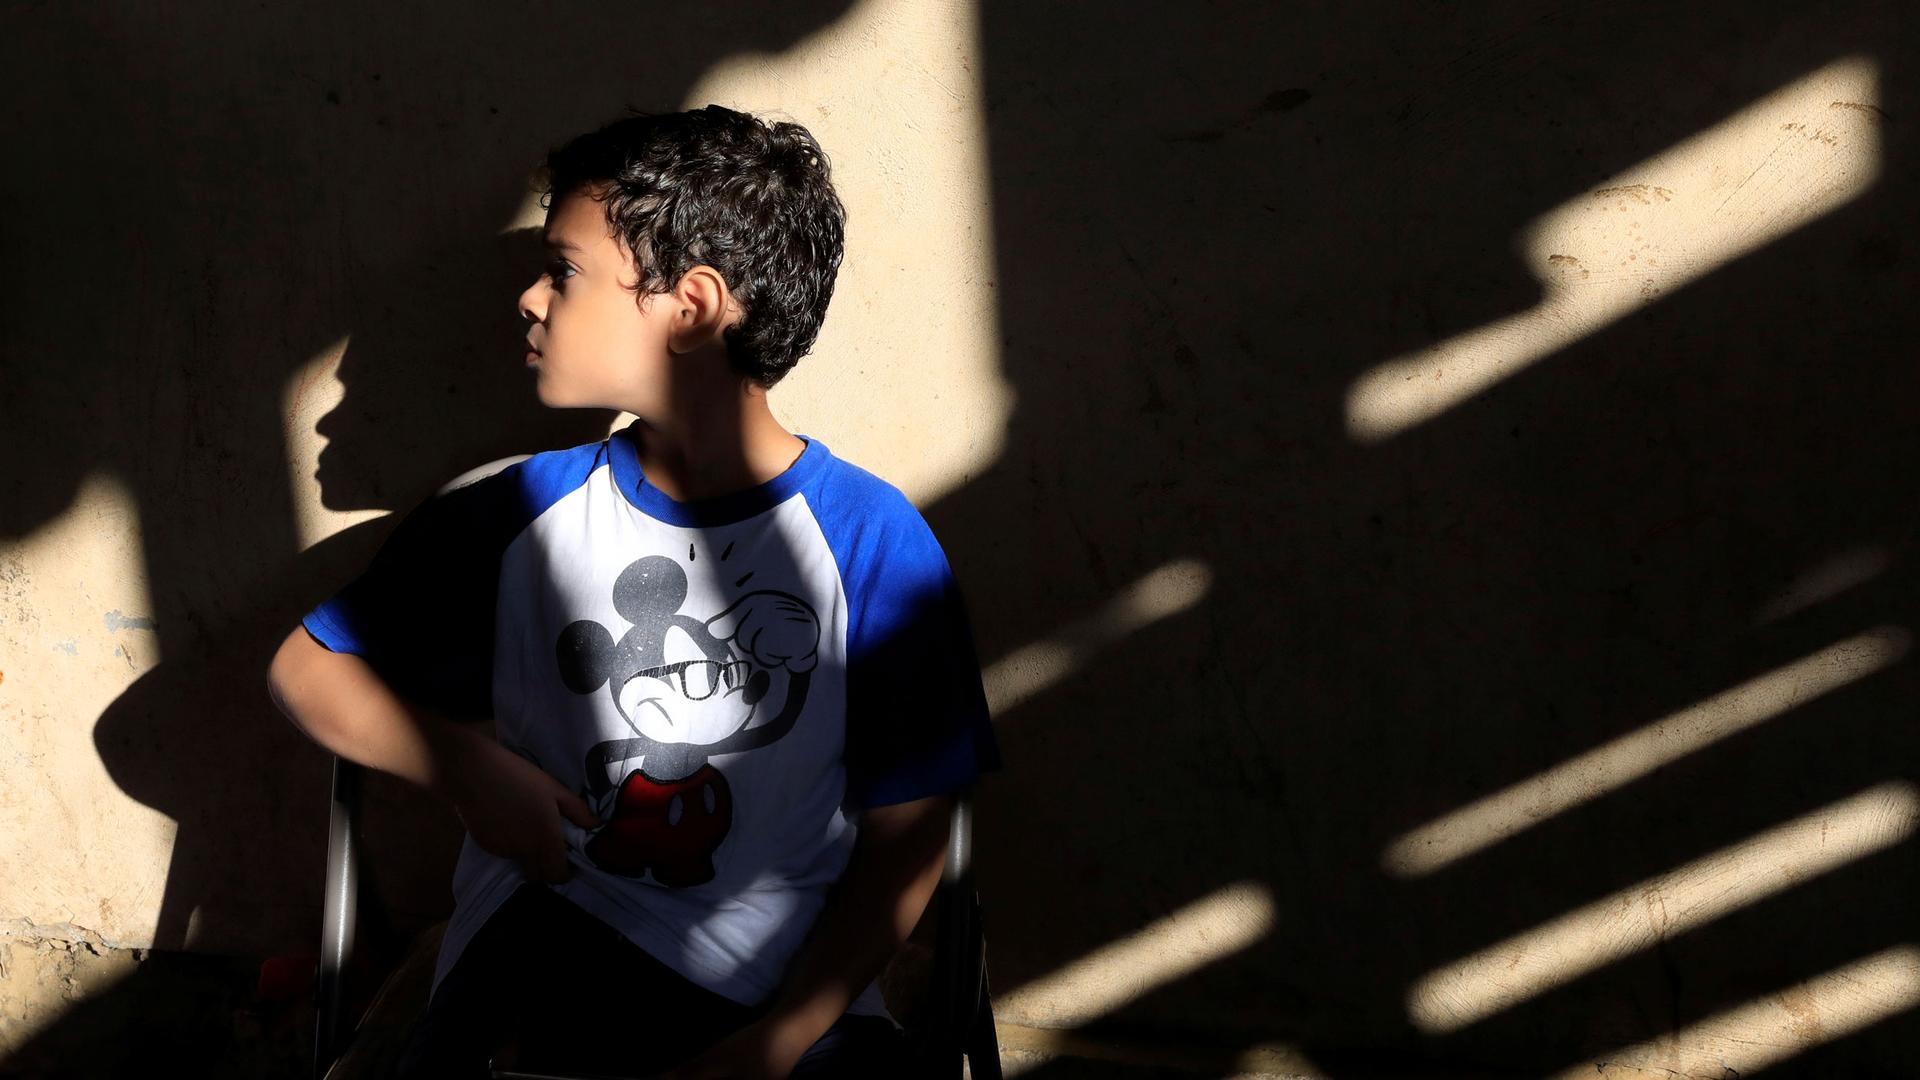 A young child is shown looking to his right and wearing a blue and white Mickey Mouse shirt.